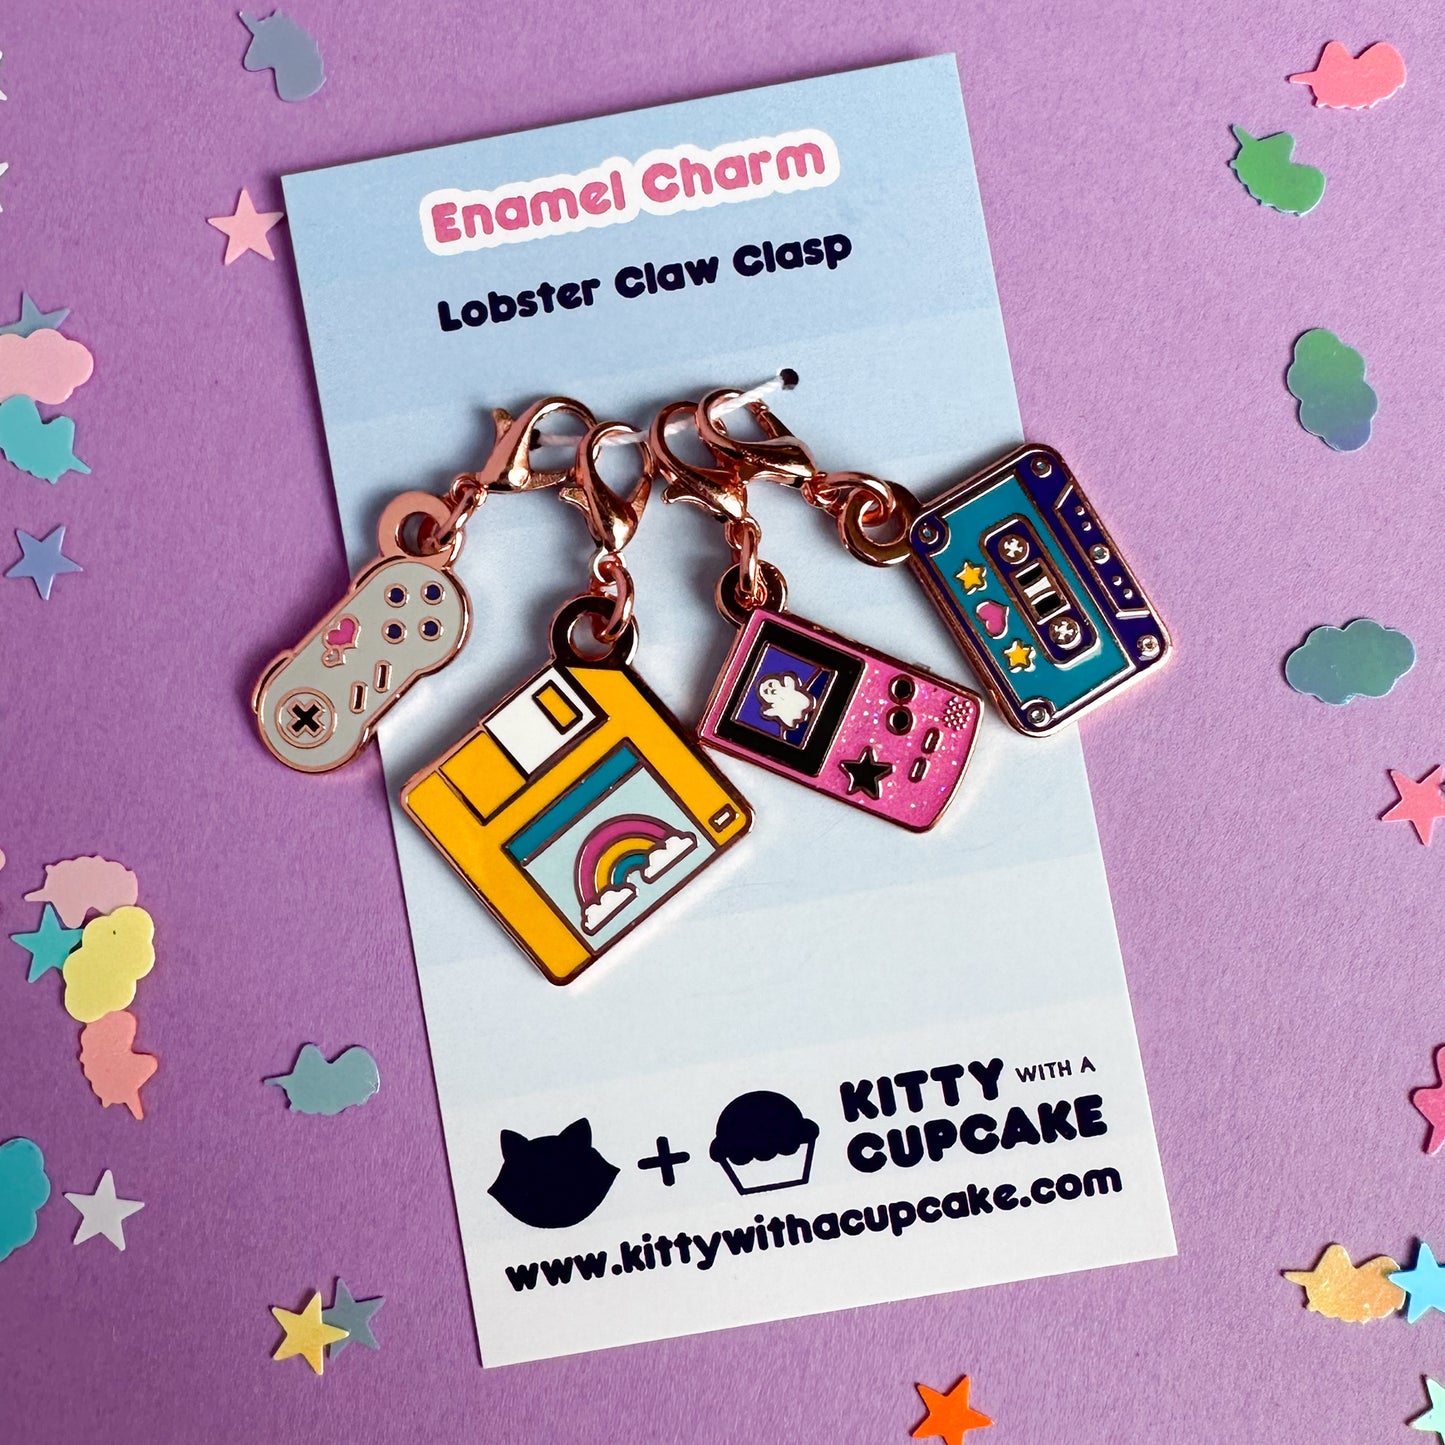 A four pack of charms packaged on a blue card. The charms are shaped like a game console controller, floppy disk, gameboy, and a cassette tape. 